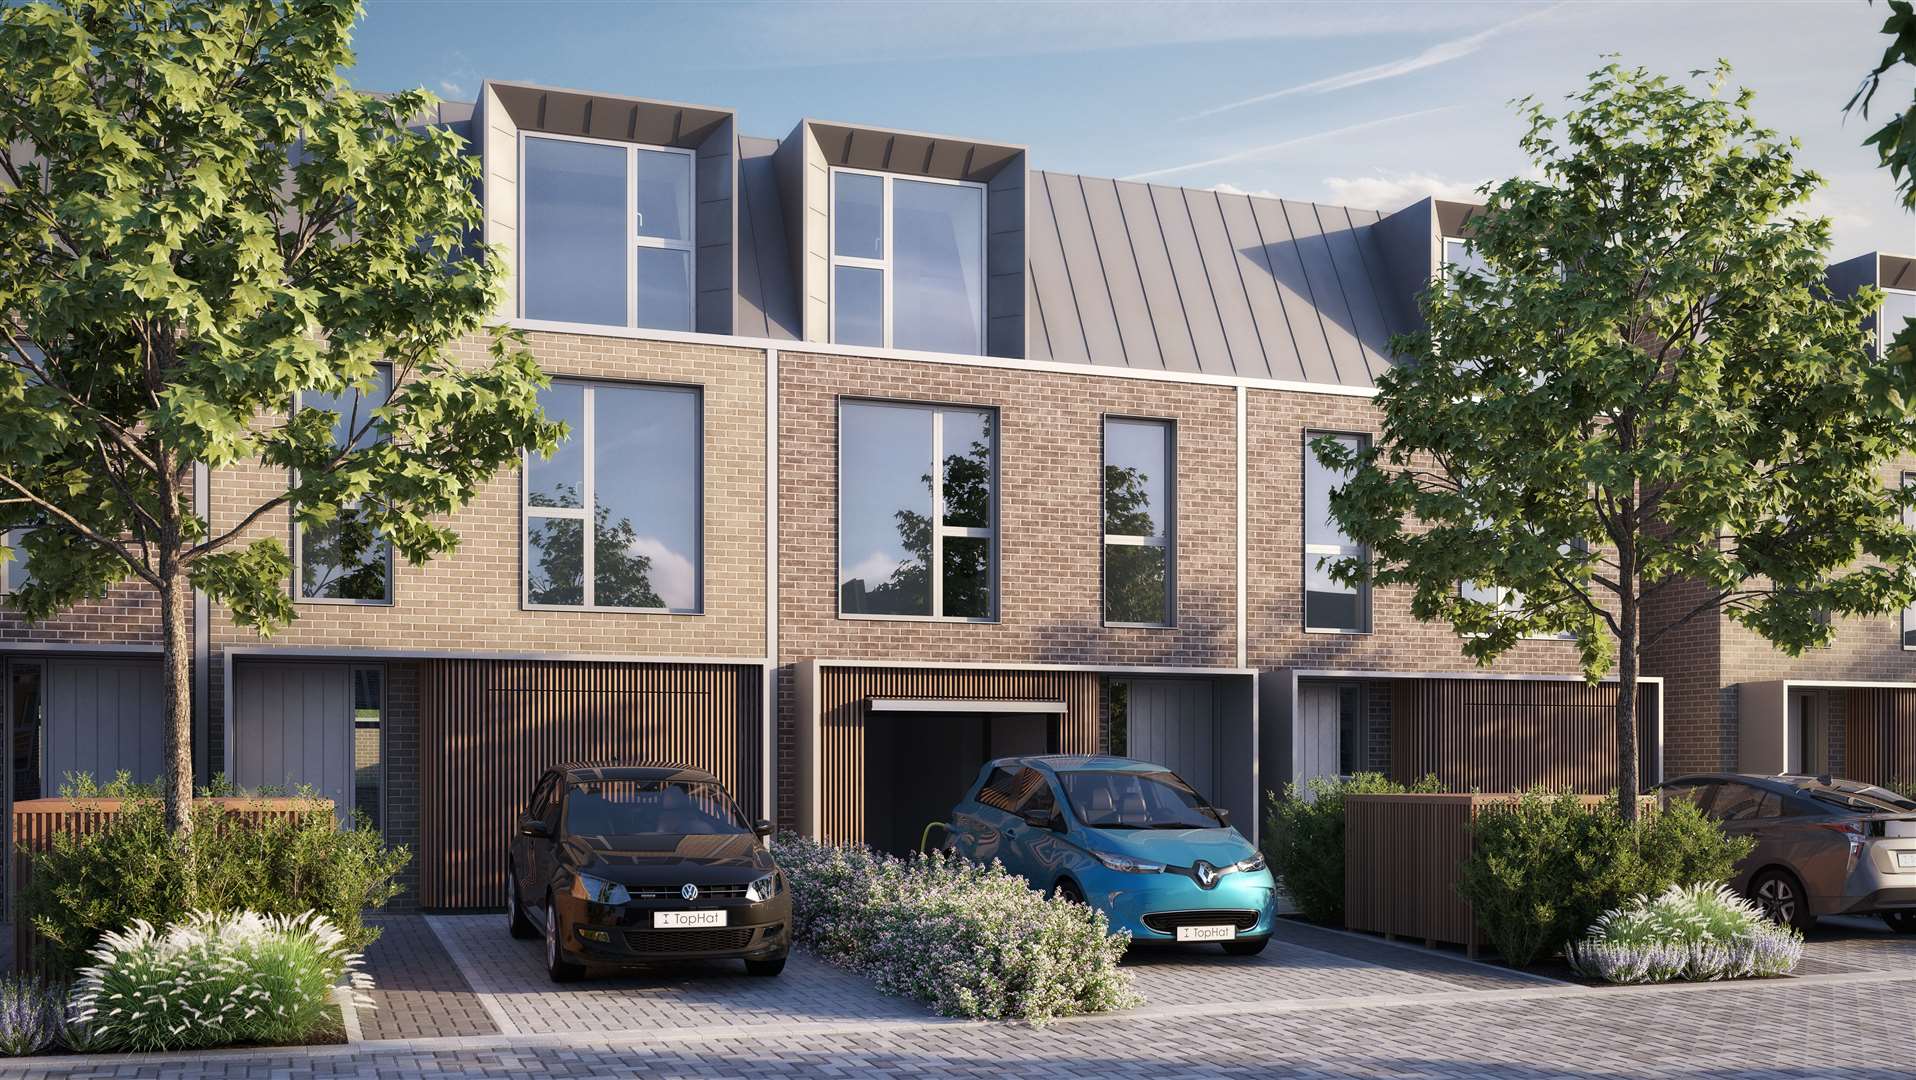 Homes are available from £320,000 and include a range of features including top floor terraces, underfloor heating, and solar panels.